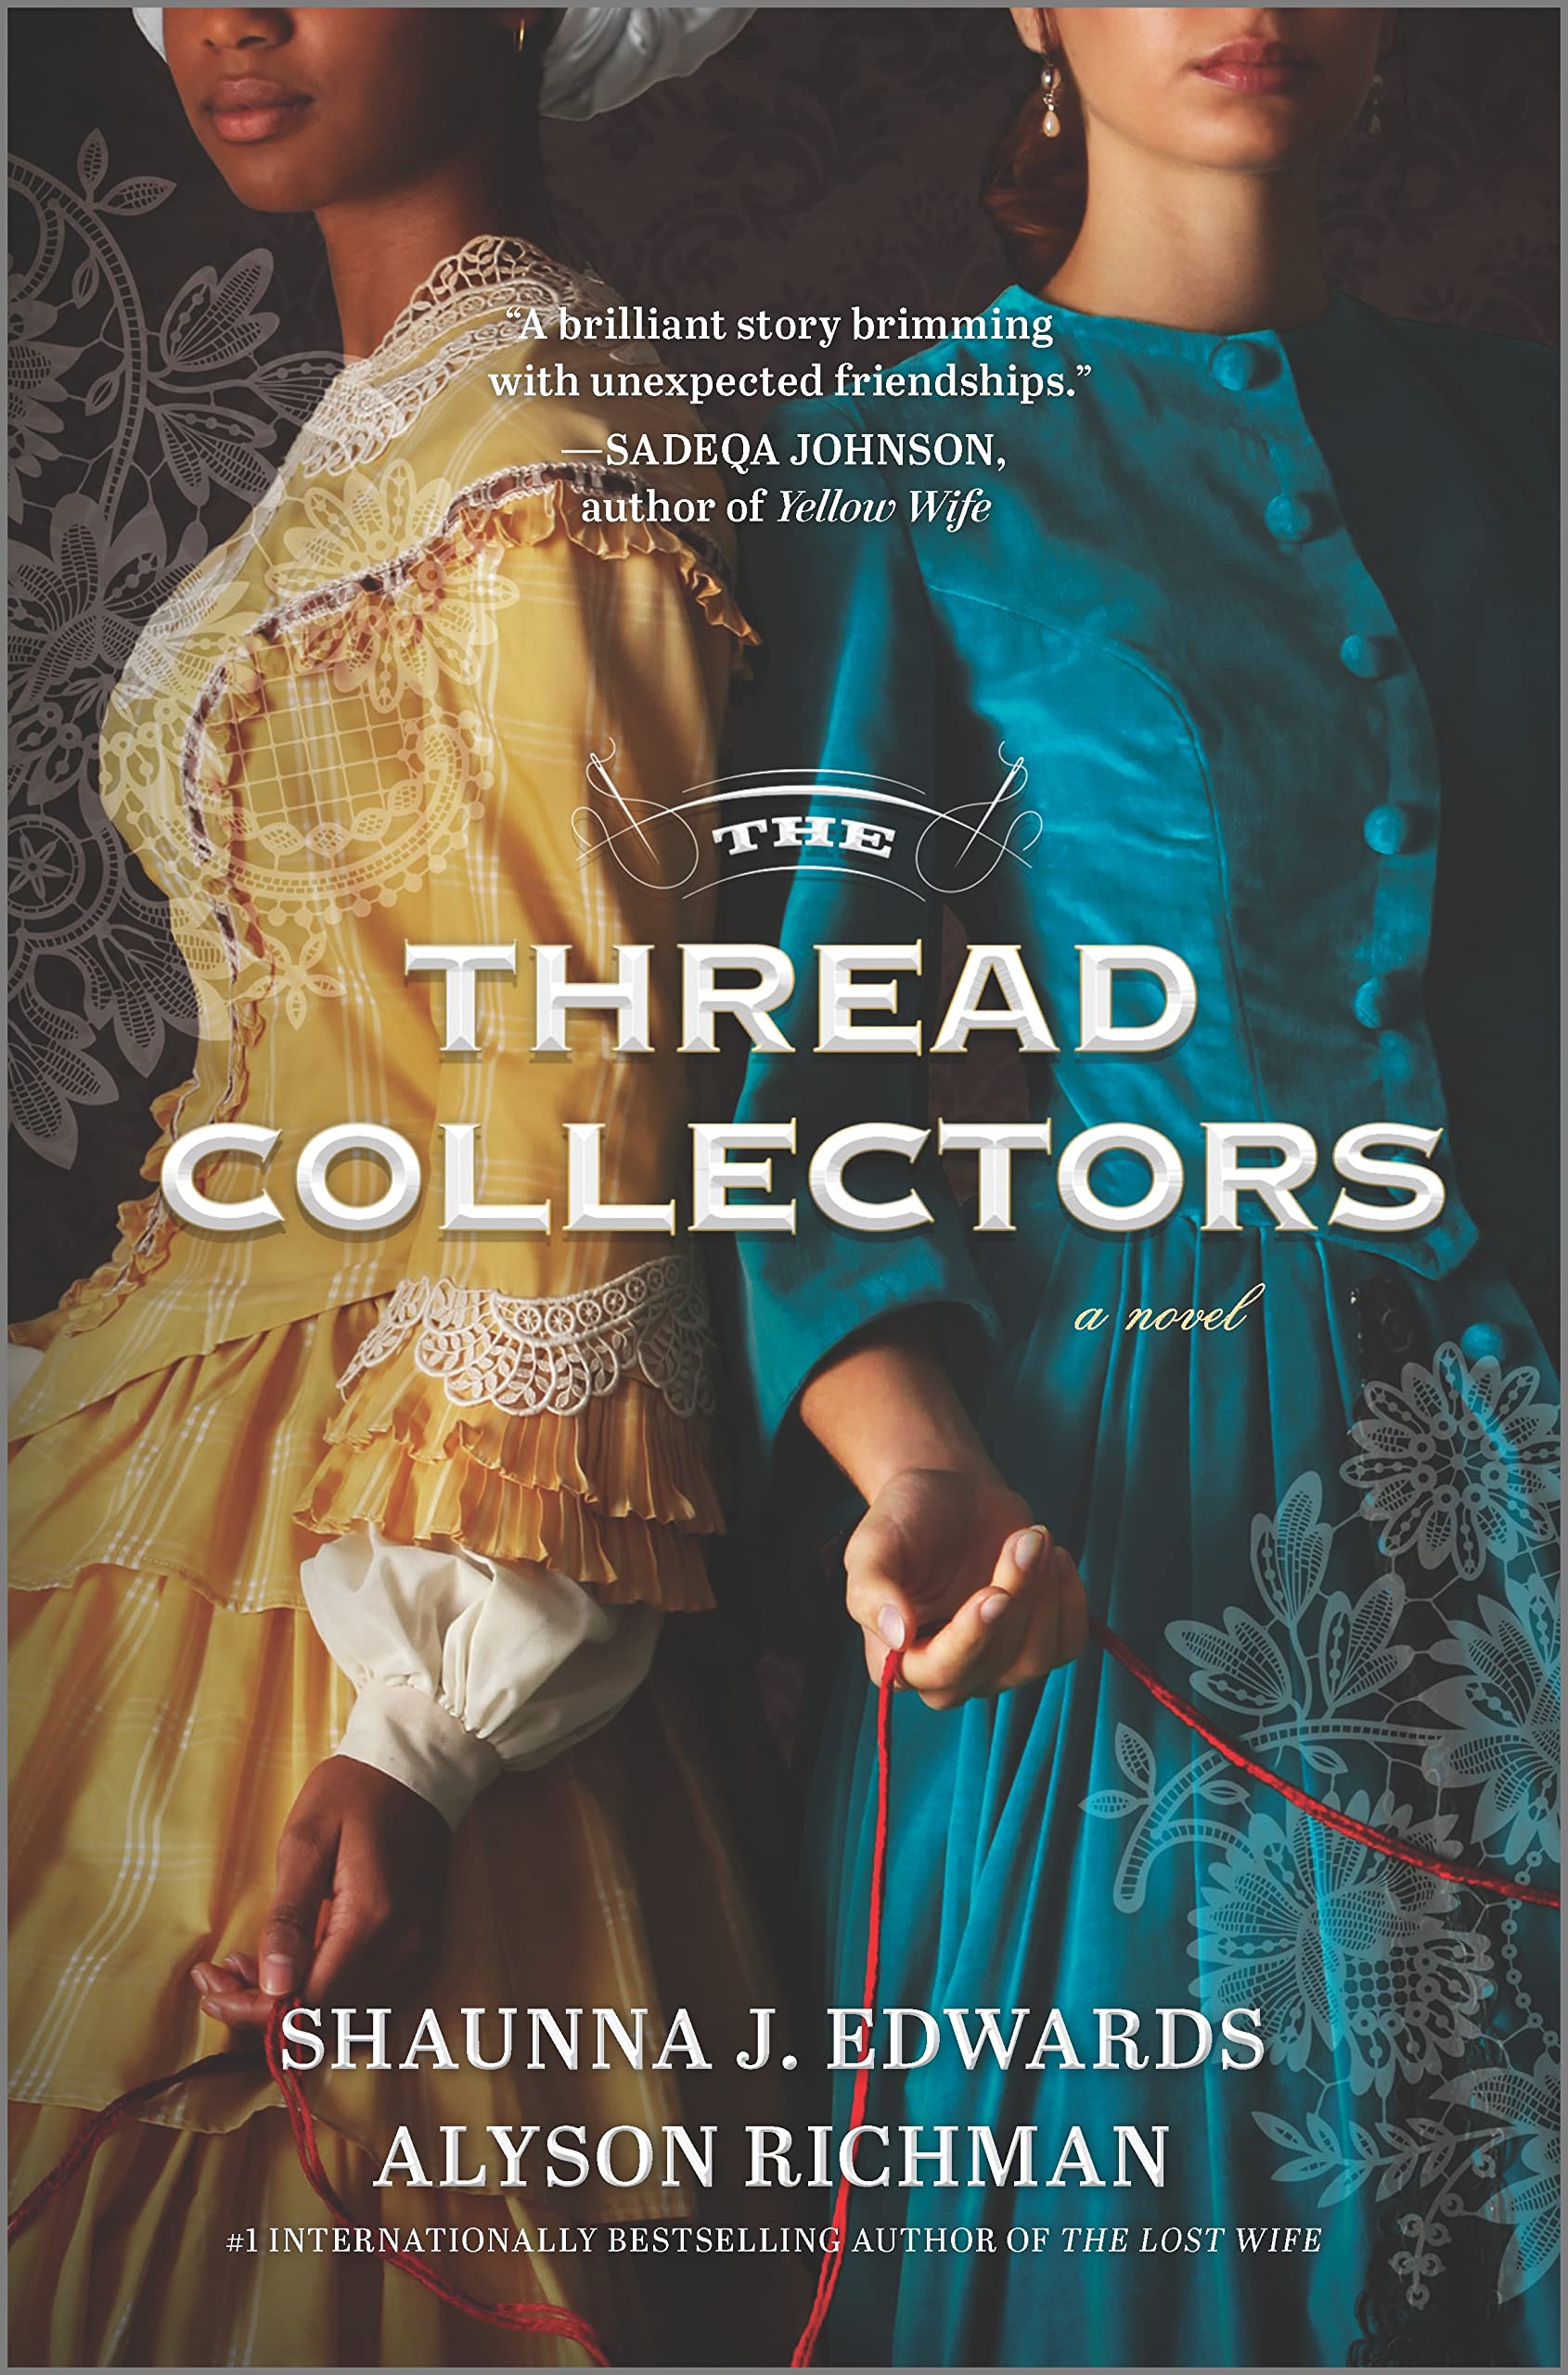 Image of book cover featuring two women dressed in long dresses hands extended with a red thread being held in their hands.